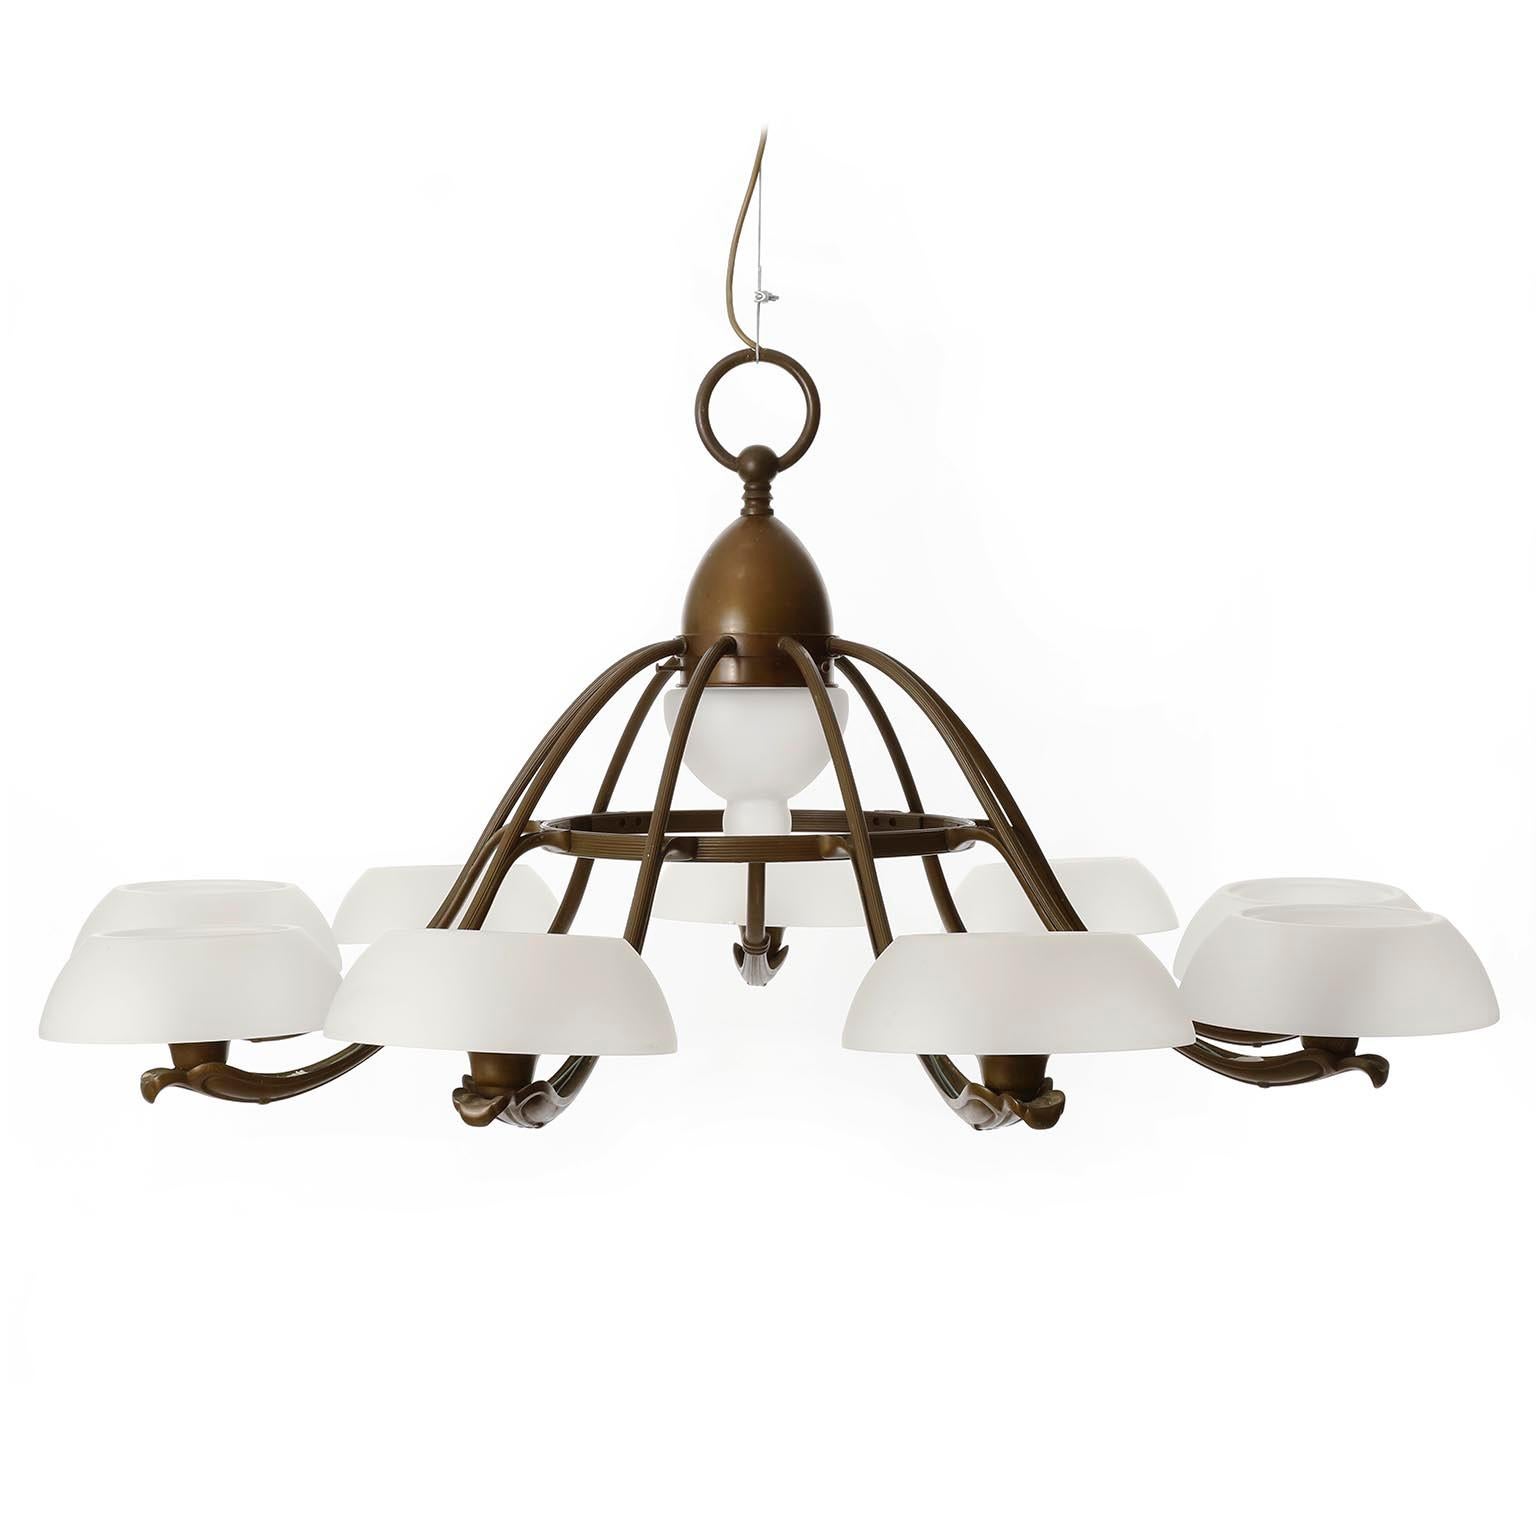 An extra large organic shaped 9-arm chandelier manufactured in Sweden, circa 1930.
It is made of a patinated brass or bronze frame with opaline glass lamp shades.
Each of the nine arms holds a socket for a medium or standard screw base bulb. There